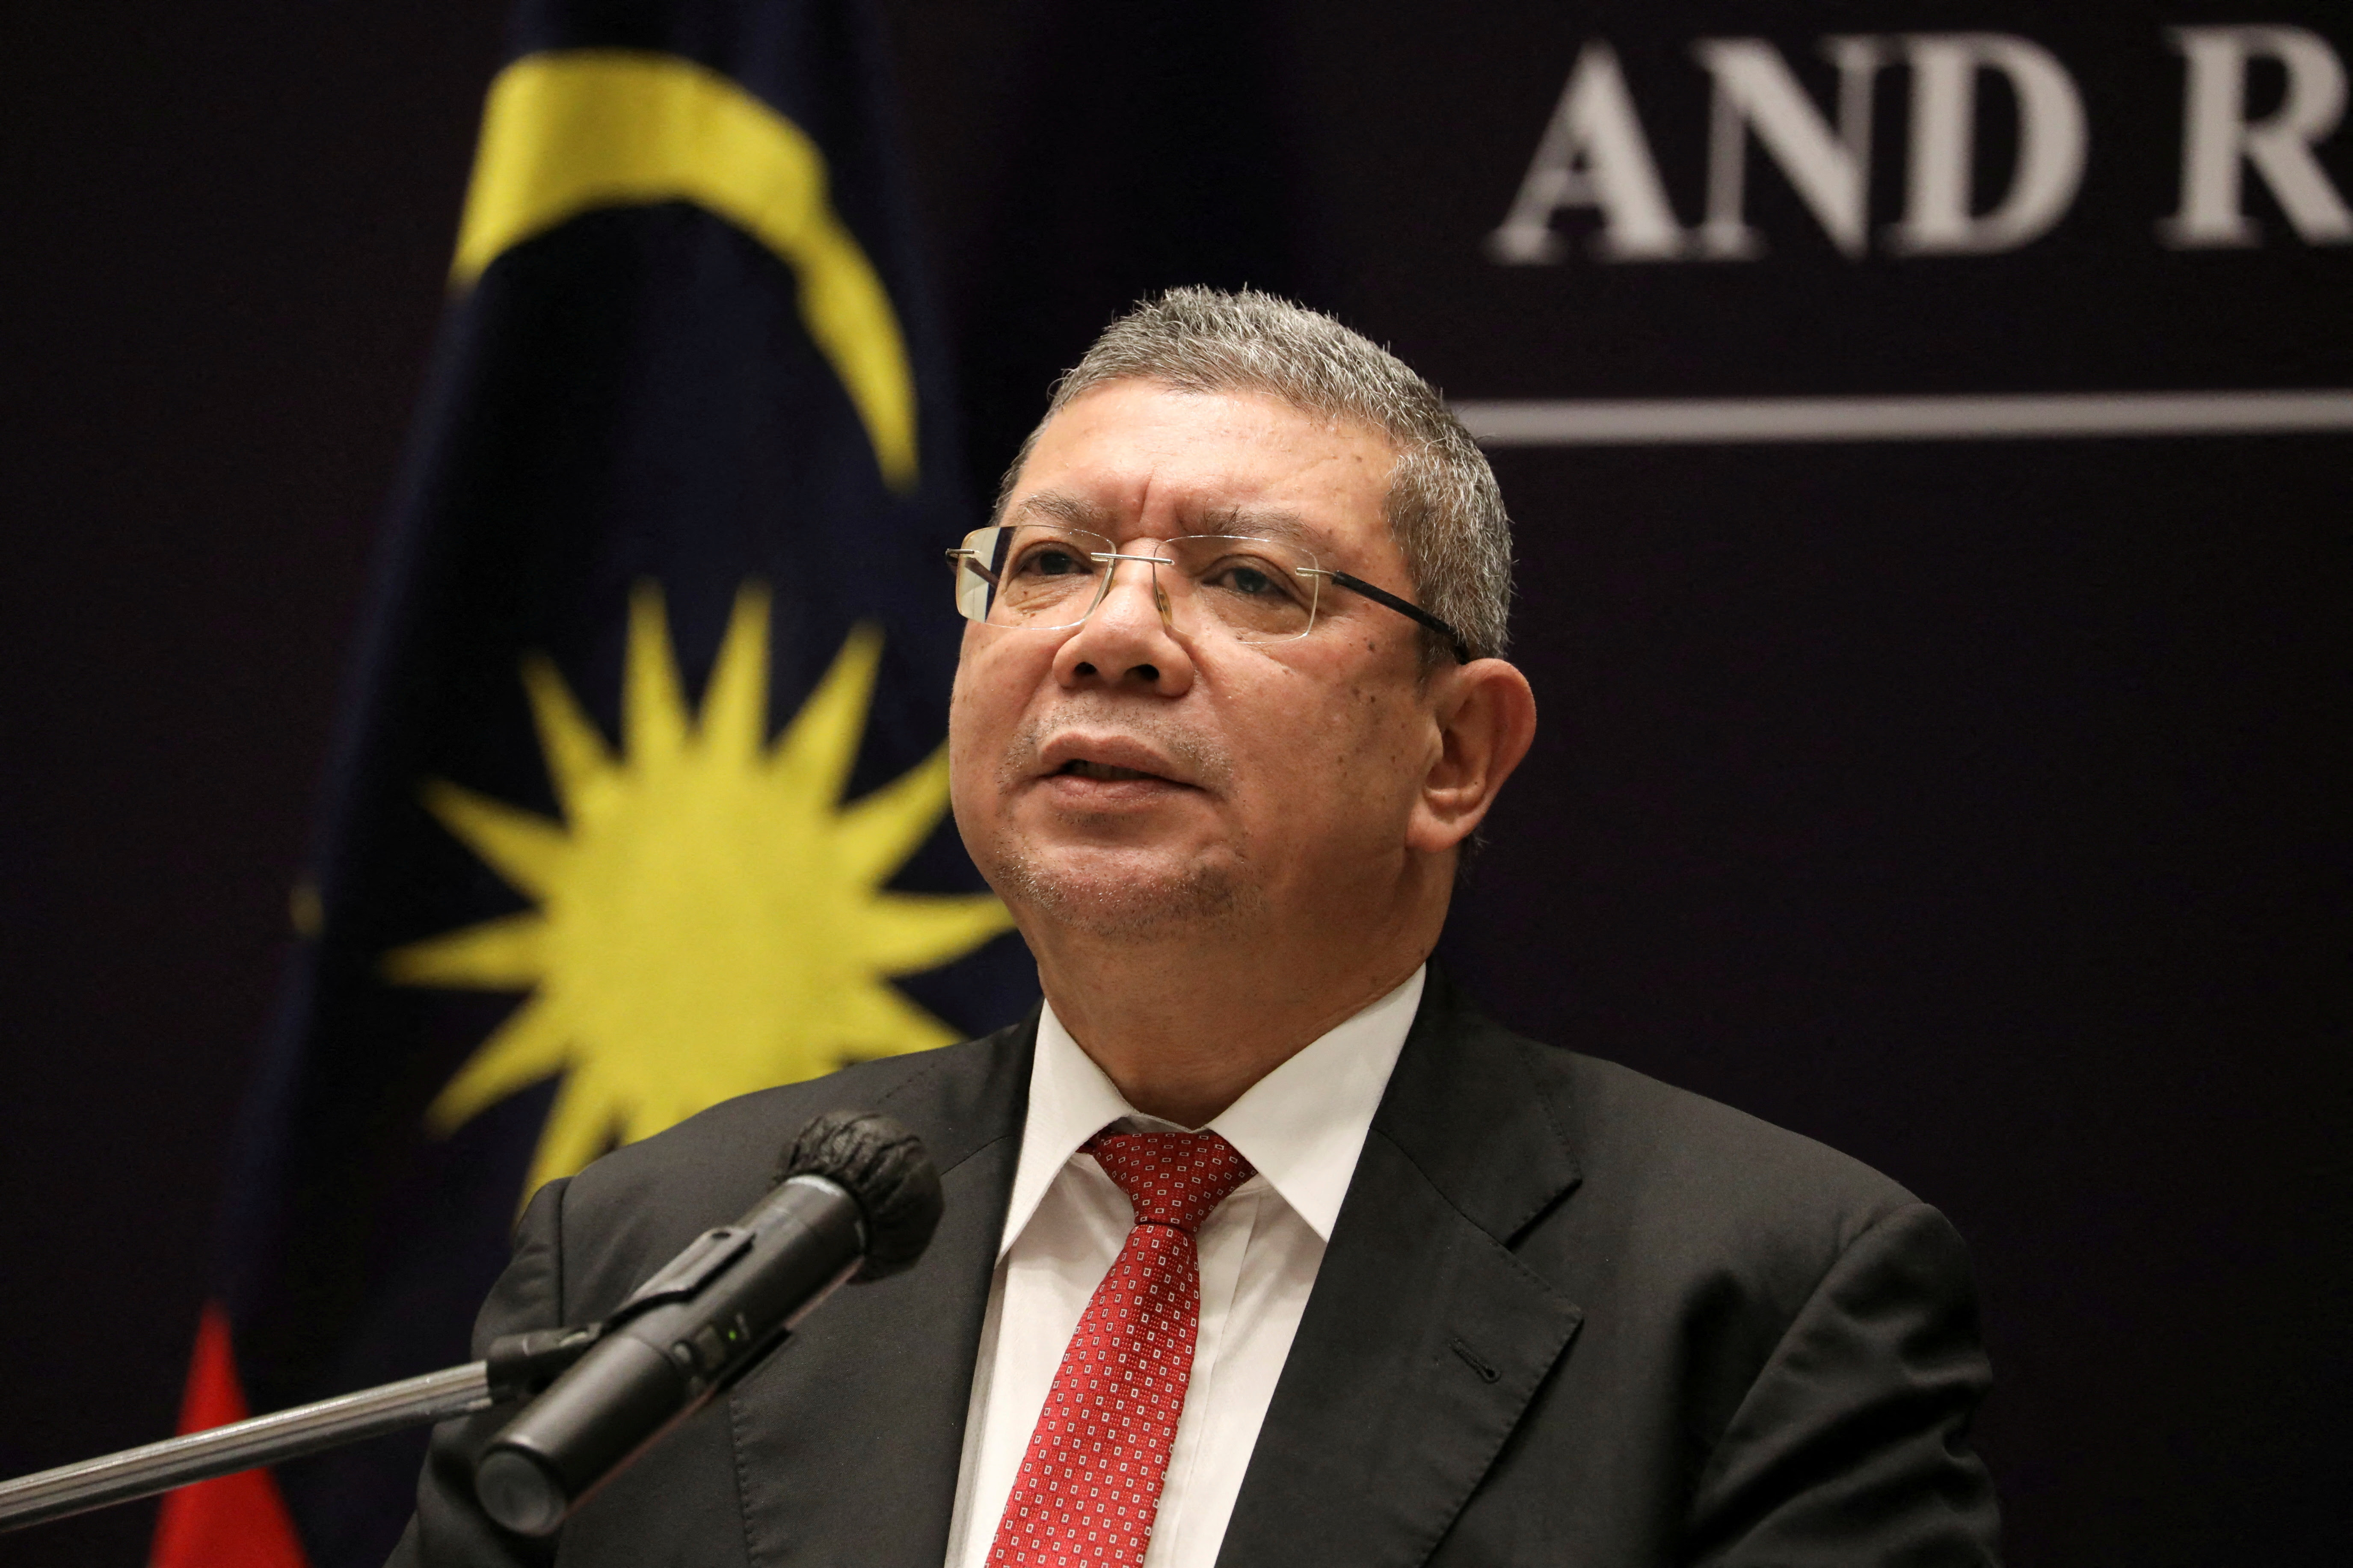 Malaysia's Foreign Minister Saifuddin Abdullah speaks during a news conference after ASEAN Summit in Kuala Lumpur, Malaysia, October 28, 2021. REUTERS/Lim Huey Teng/File Photo